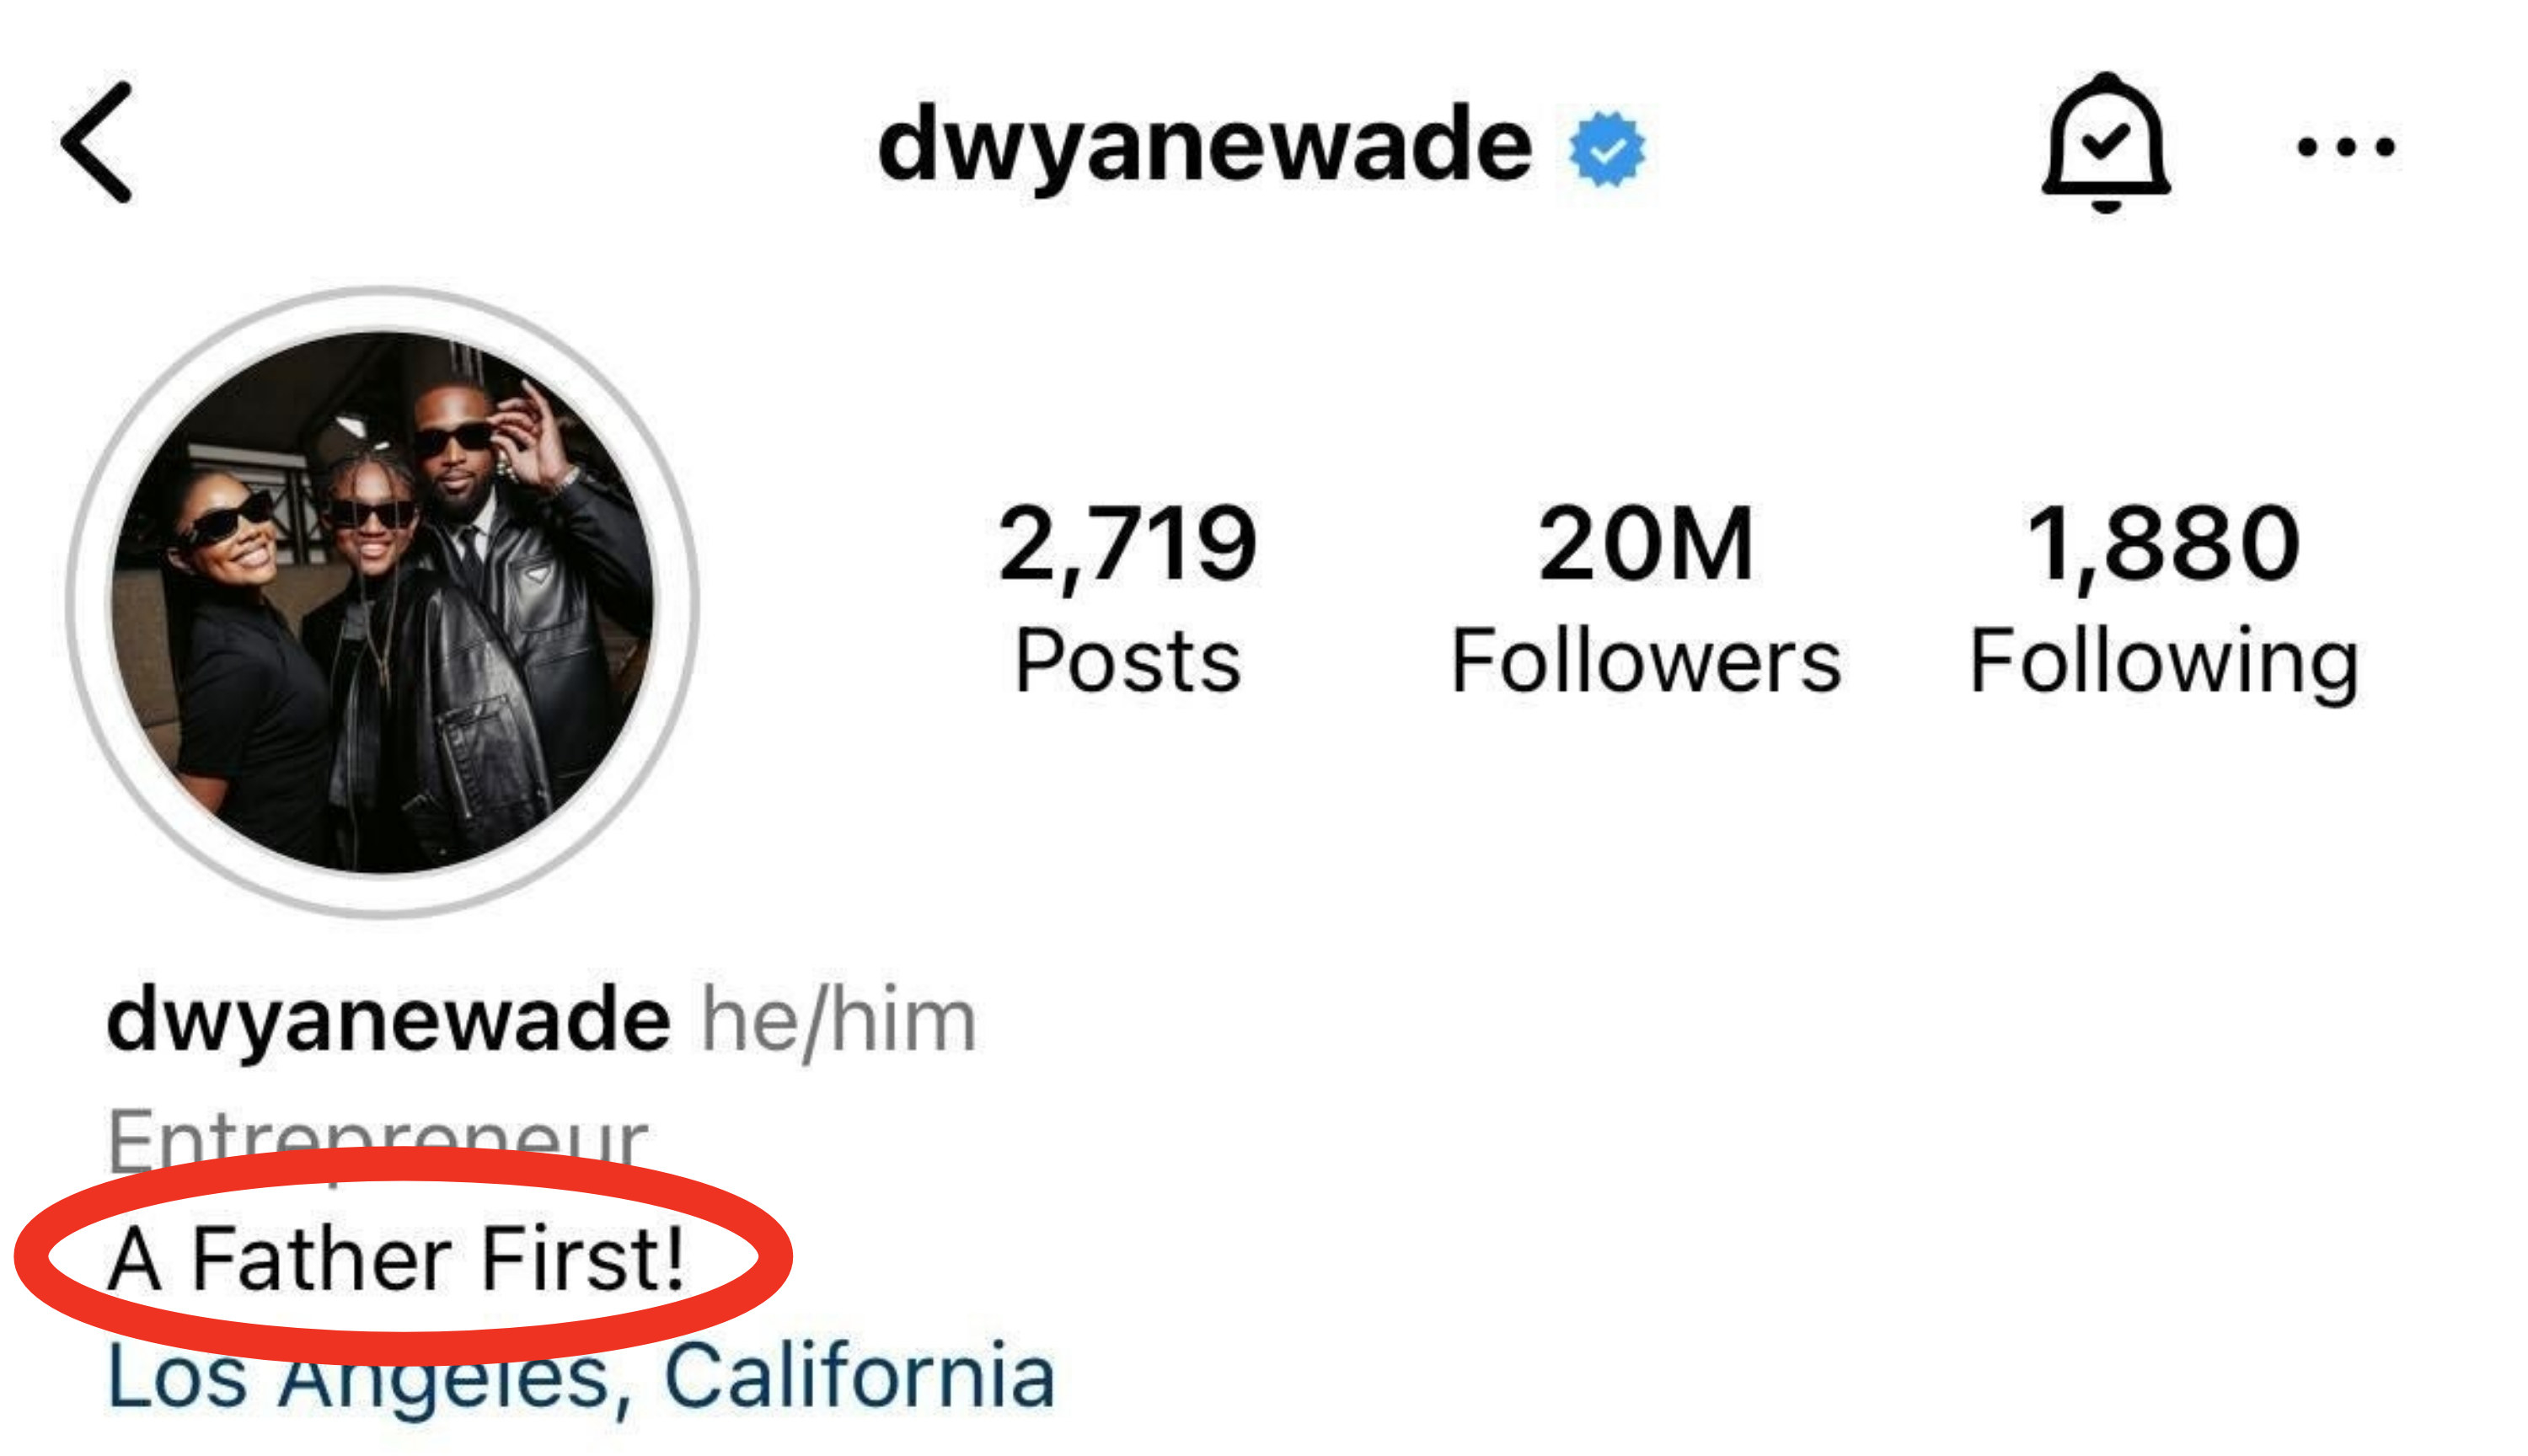 A closeup of  Dwyane Wade IG profile that says &quot;A Father First!&quot;